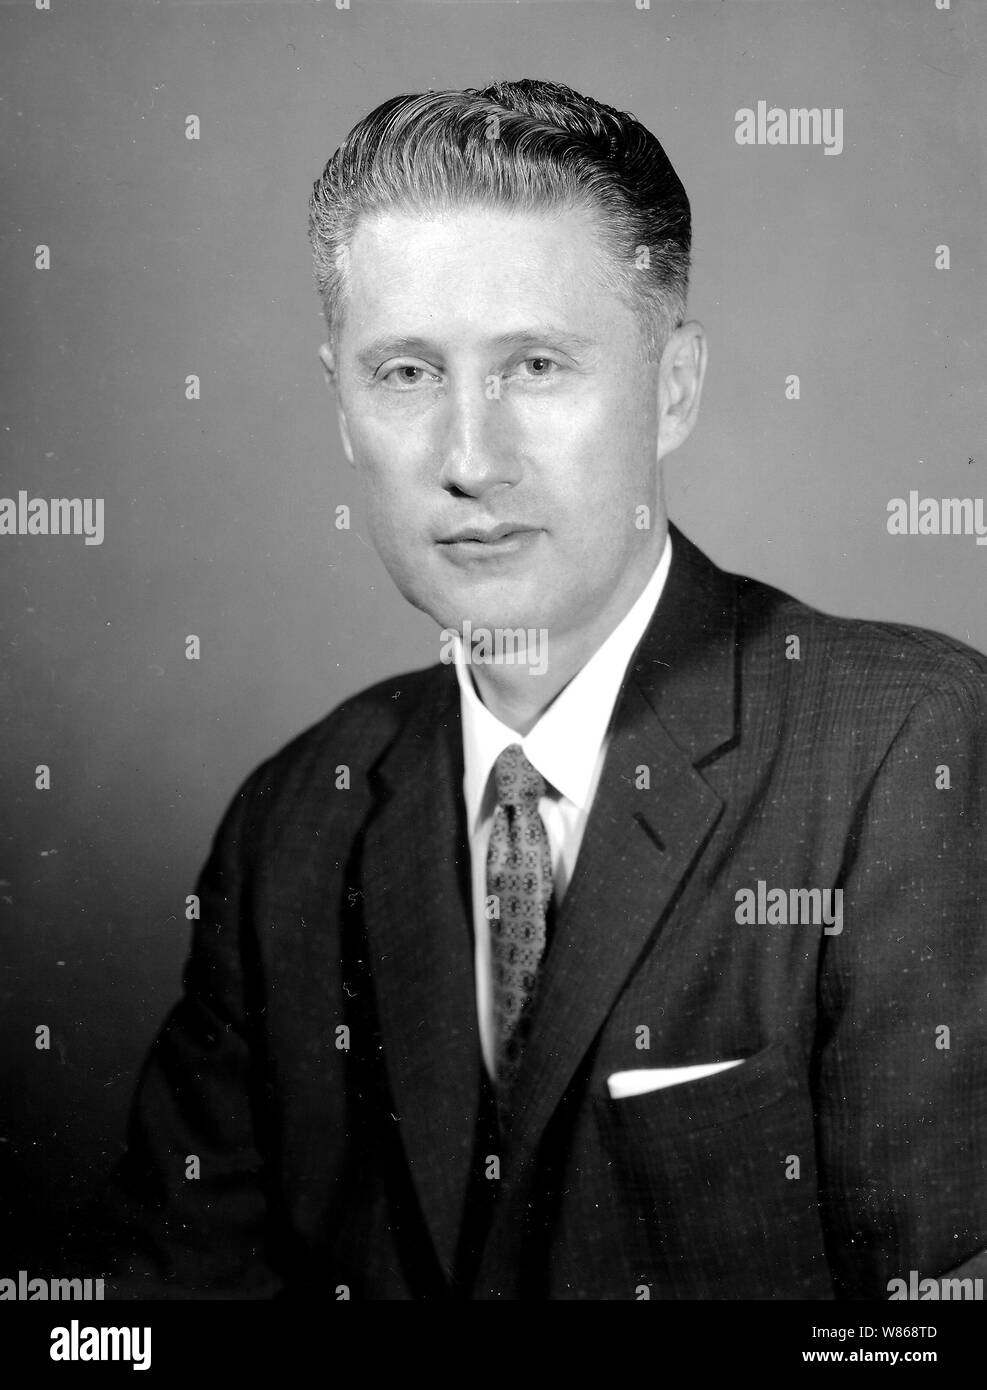 HANDOUT - Adelphi, MD - May 31, 2005 - Undated file photo of Federal Bureau of Investigation Acting Associate Director W. Mark Felt. Mr Felt revealed in the July issue of Vanity Fair magazine that he was in the resignation of United States President Richard M. Nixon. Credit: FBI Collection at NARA via CNP Photo: FBI Collection at NARA/Consolidated/dpa | usage worldwide Stock Photo